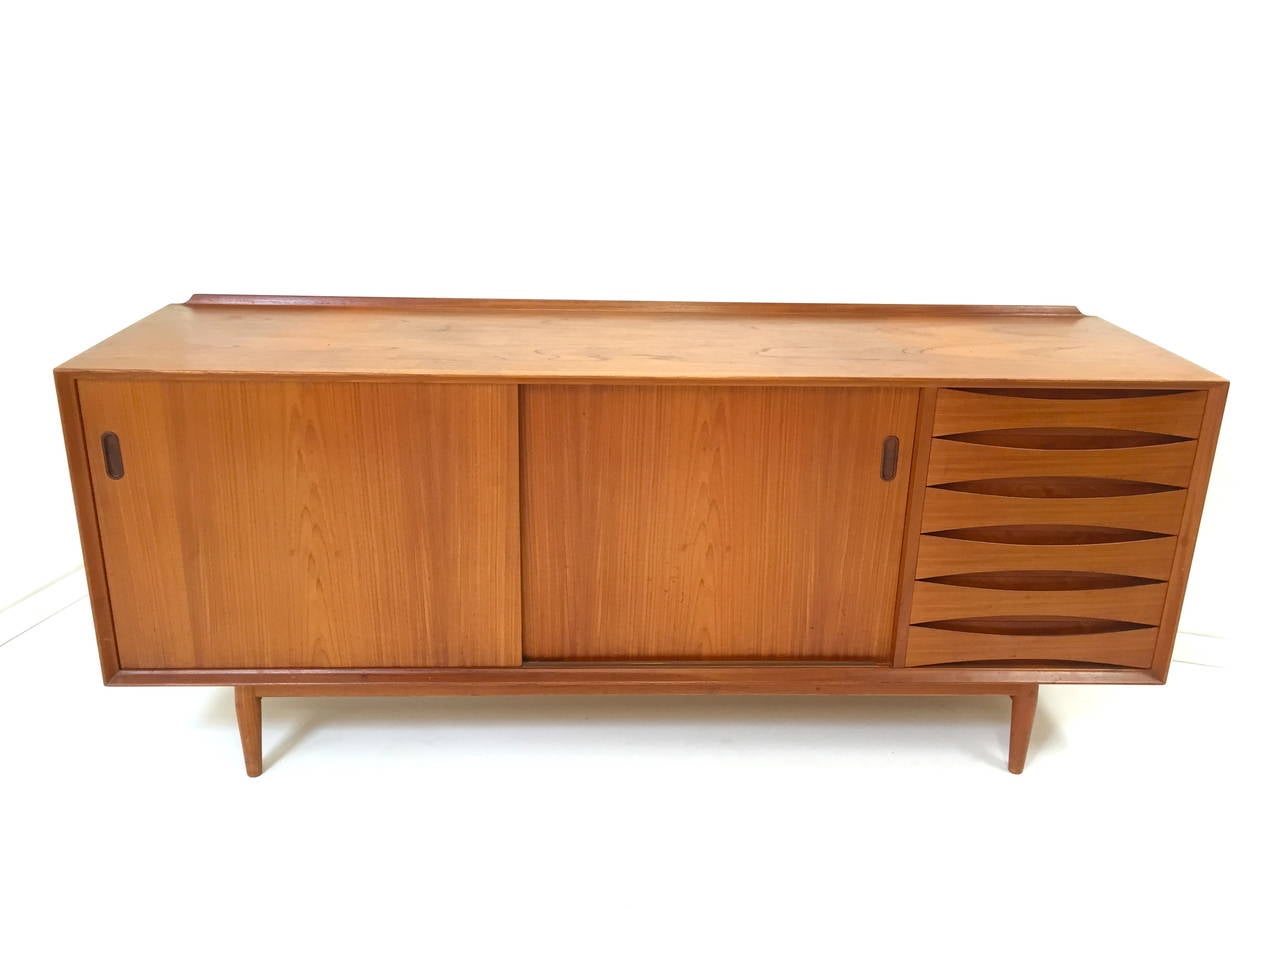 Danish modern teak credenza with reversible doors by Arne Vodder for Sibast. Iconic Danish design with reversible teak/black lacquer doors and signature Vodder bowtie drawers. Top quality Danish Design and construction in excellent refinished